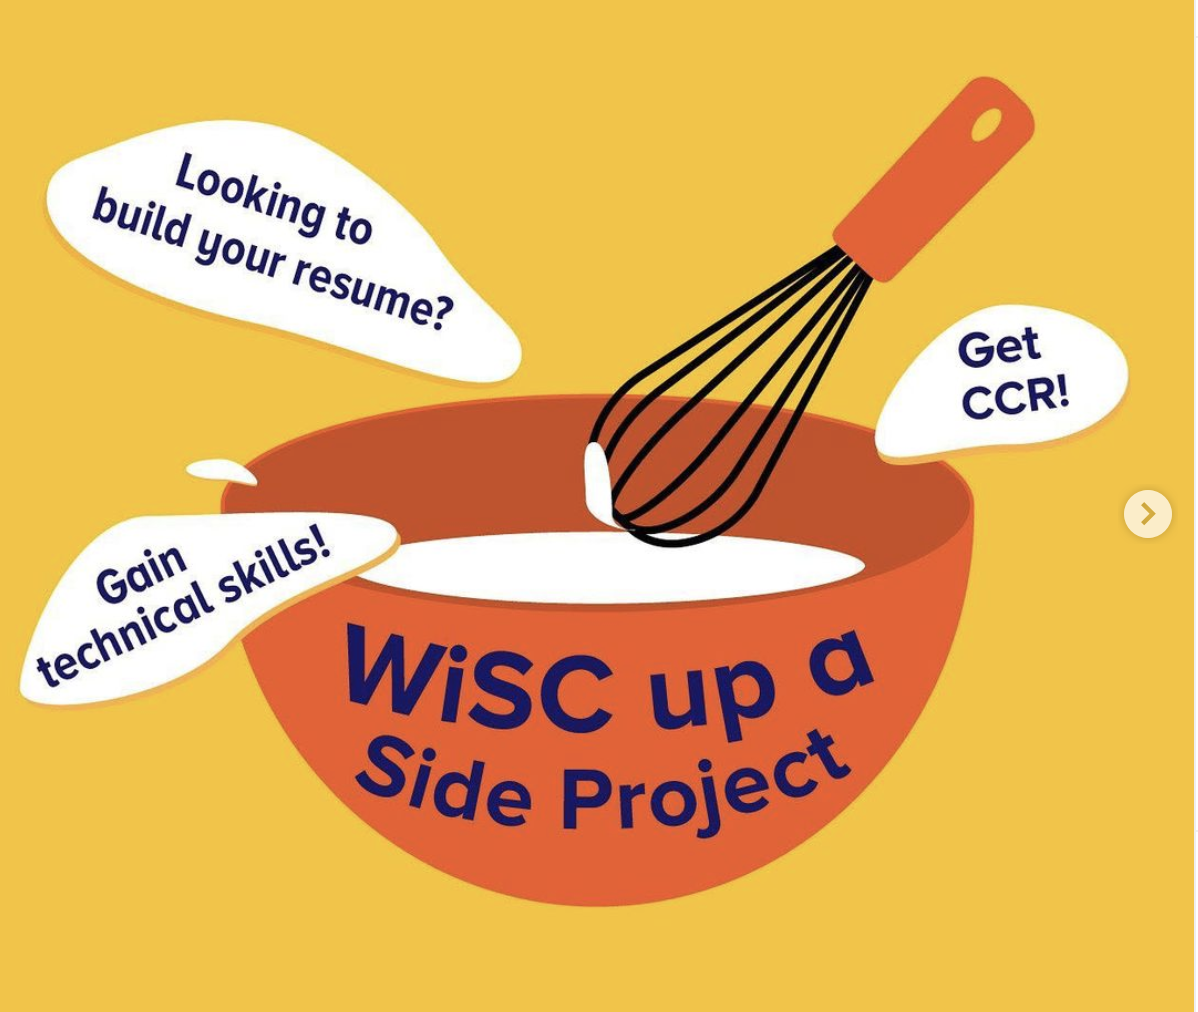 wisc up a side project